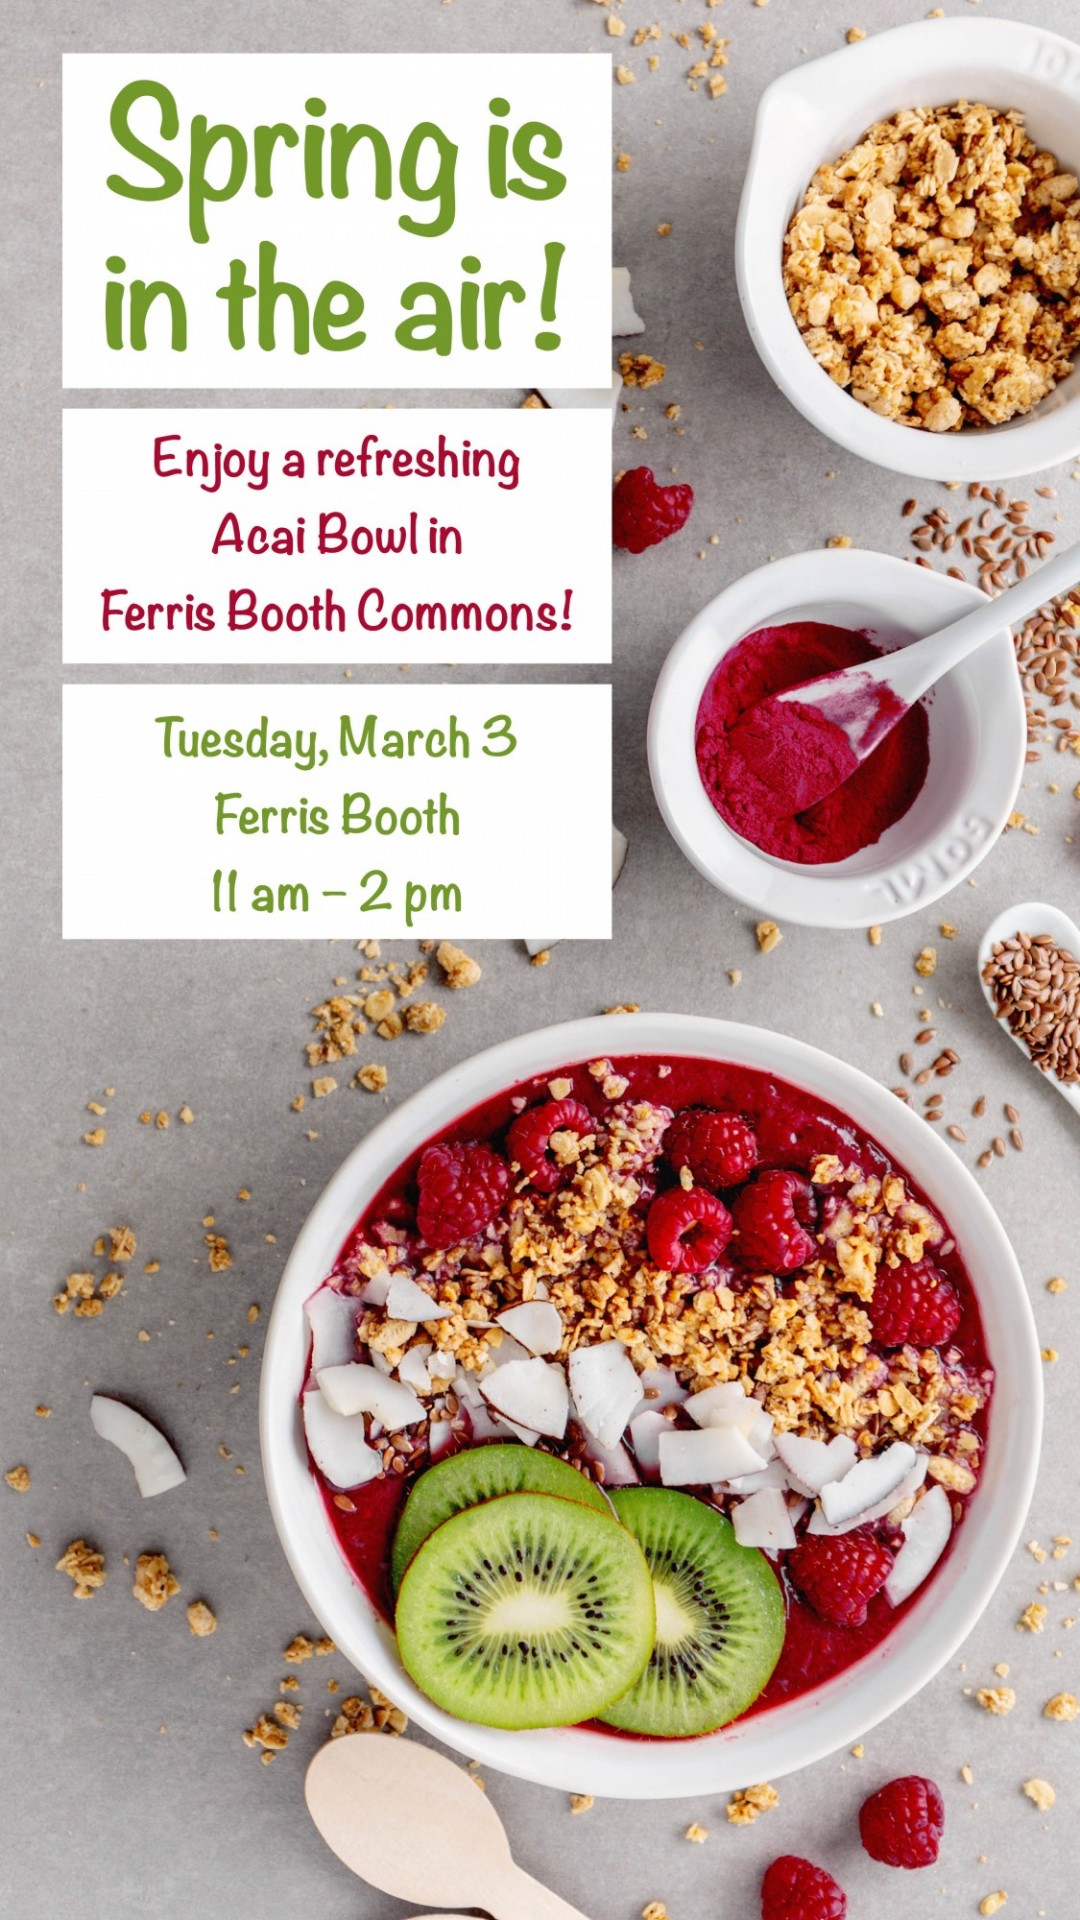 Enjoy a refreshing Acai Bowl in Ferris Booth Commons